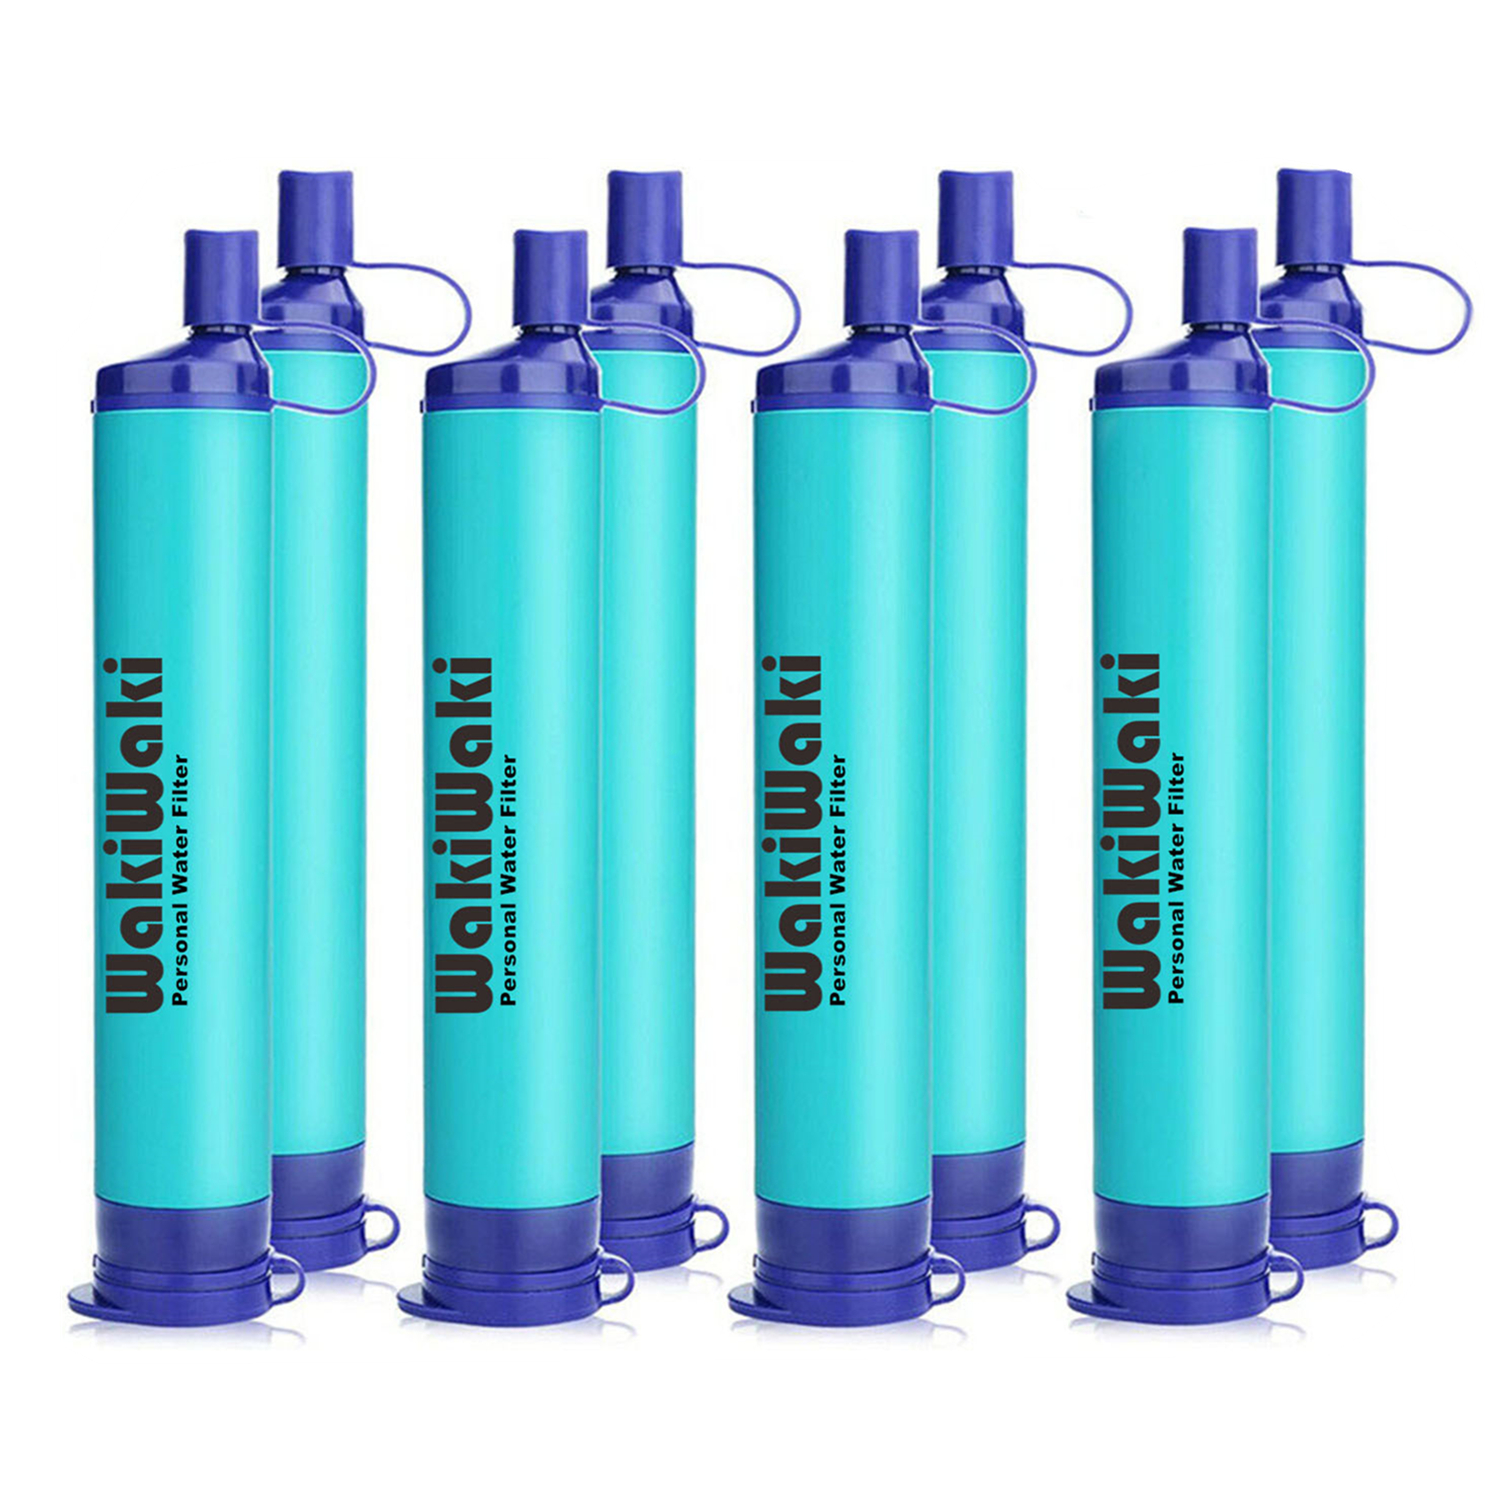 10x Camping Hiking Emergency Life Survival Portable Purifier Water Filter Straw 